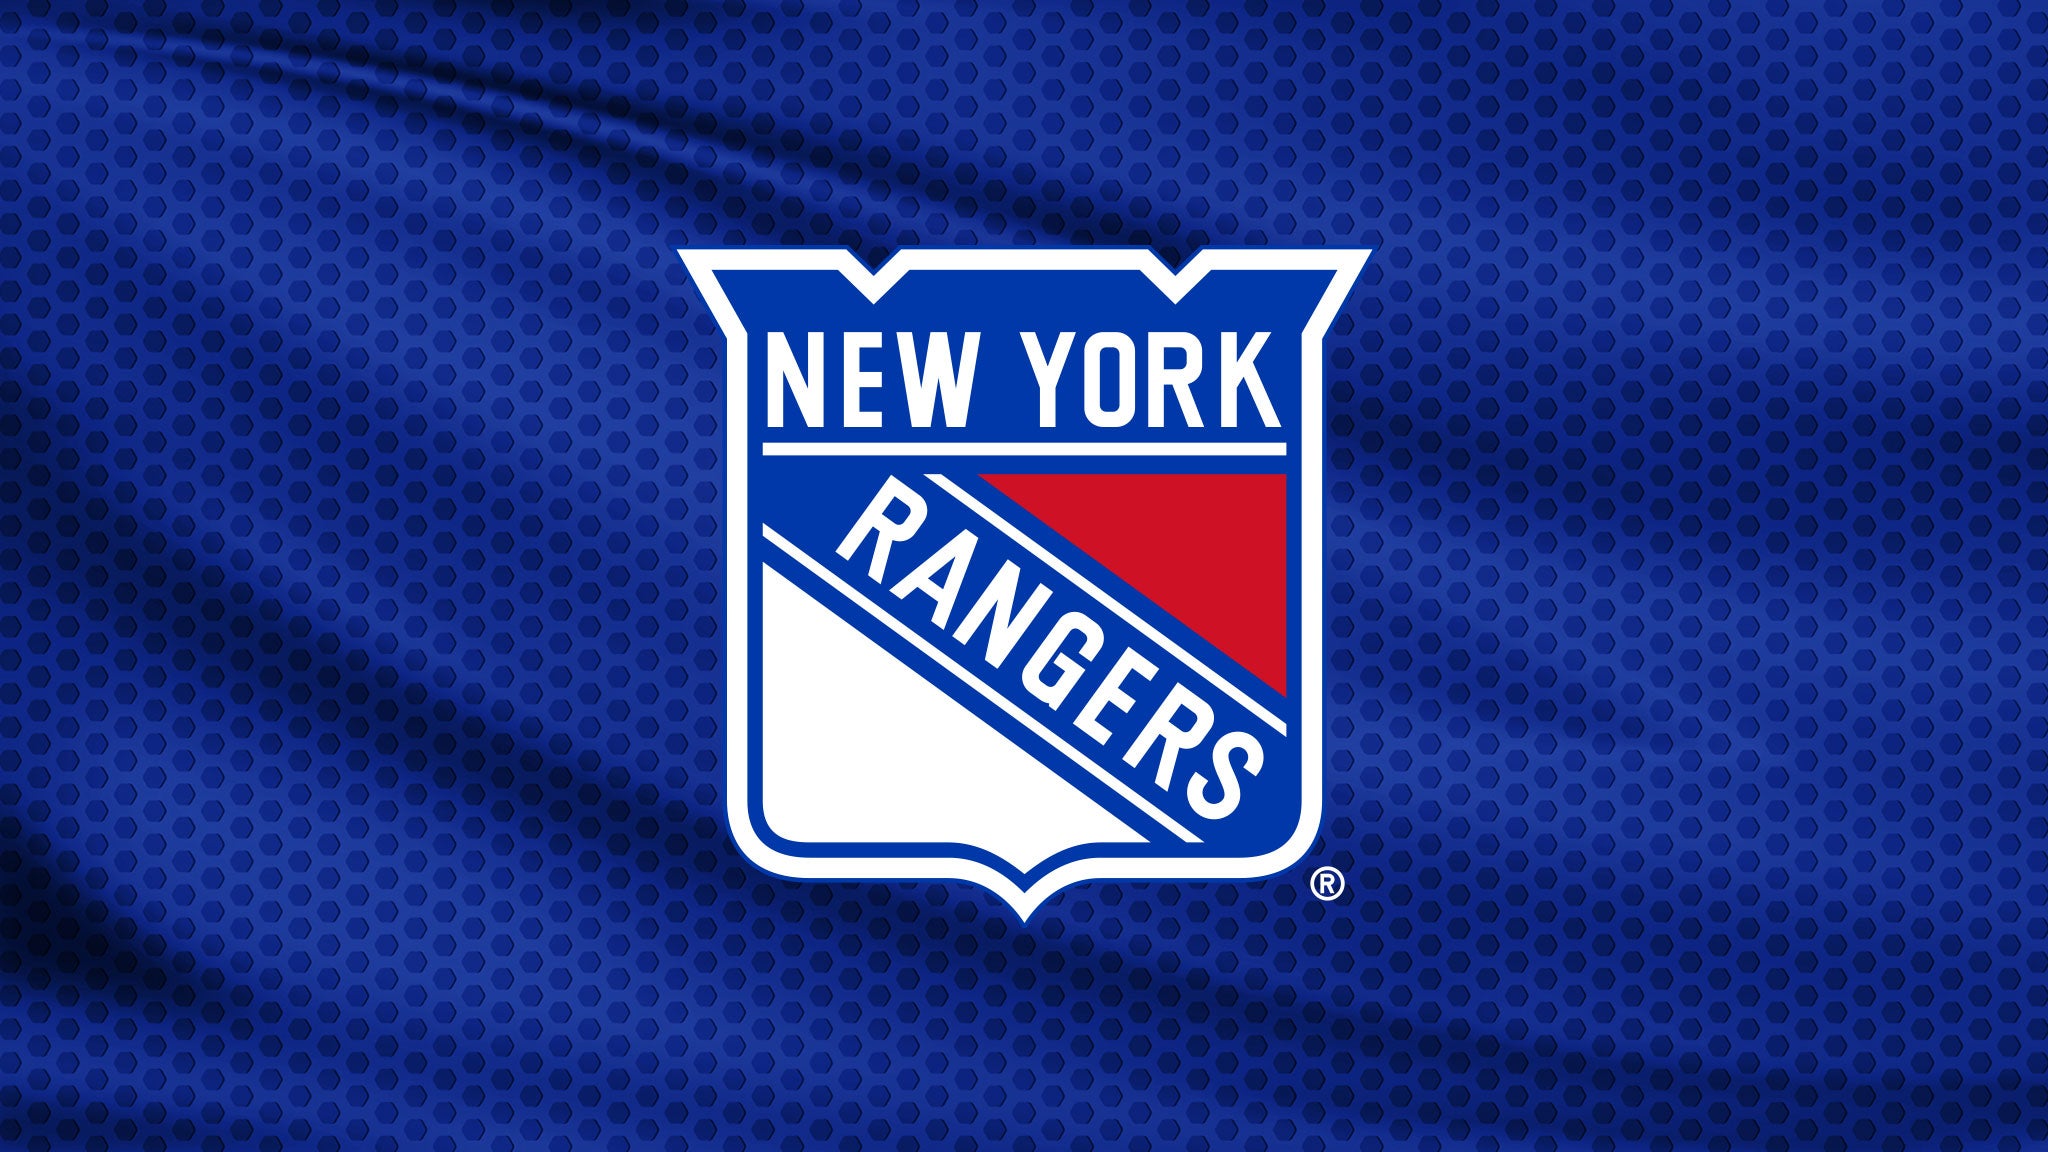 New York Rangers vs. Dallas Stars in New York promo photo for Chase Holiday  presale offer code